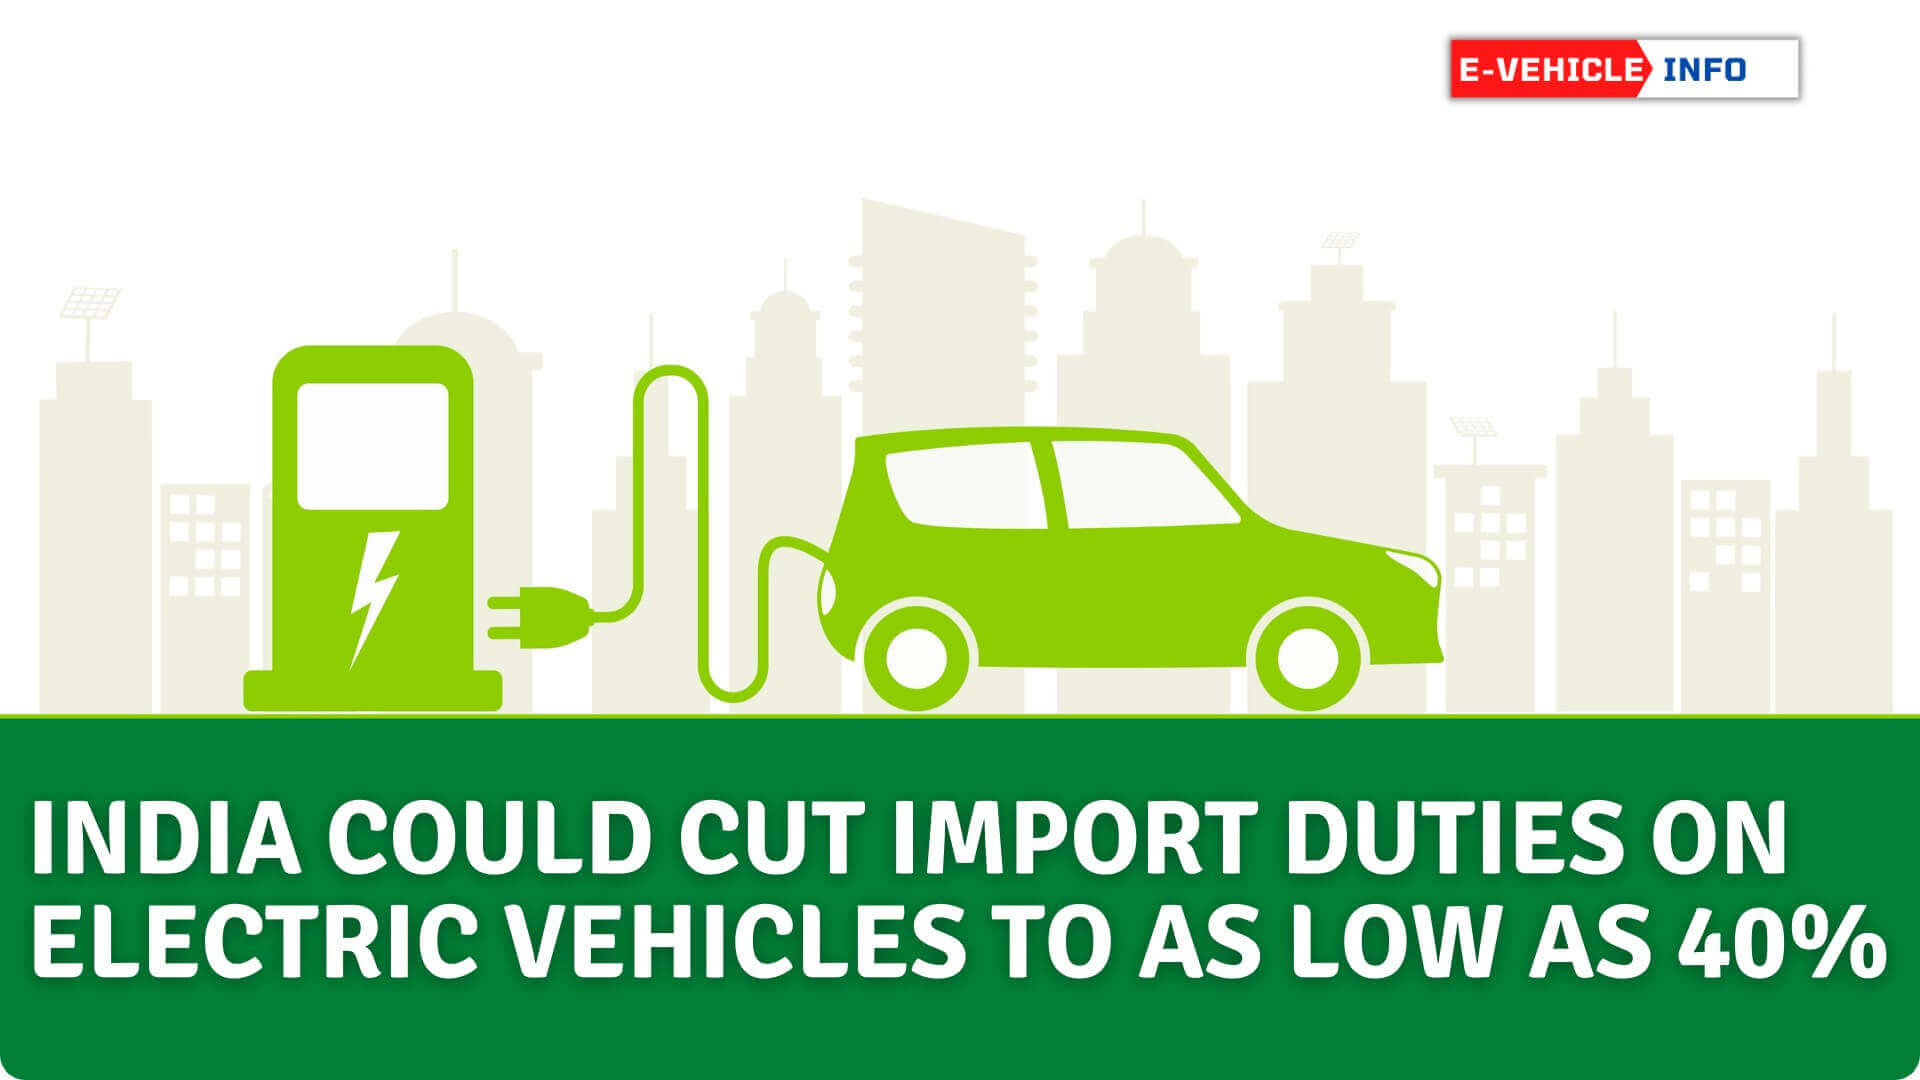 https://e-vehicleinfo.com/india-could-cut-import-duty-on-electric-vehicles-by-up-to-40/